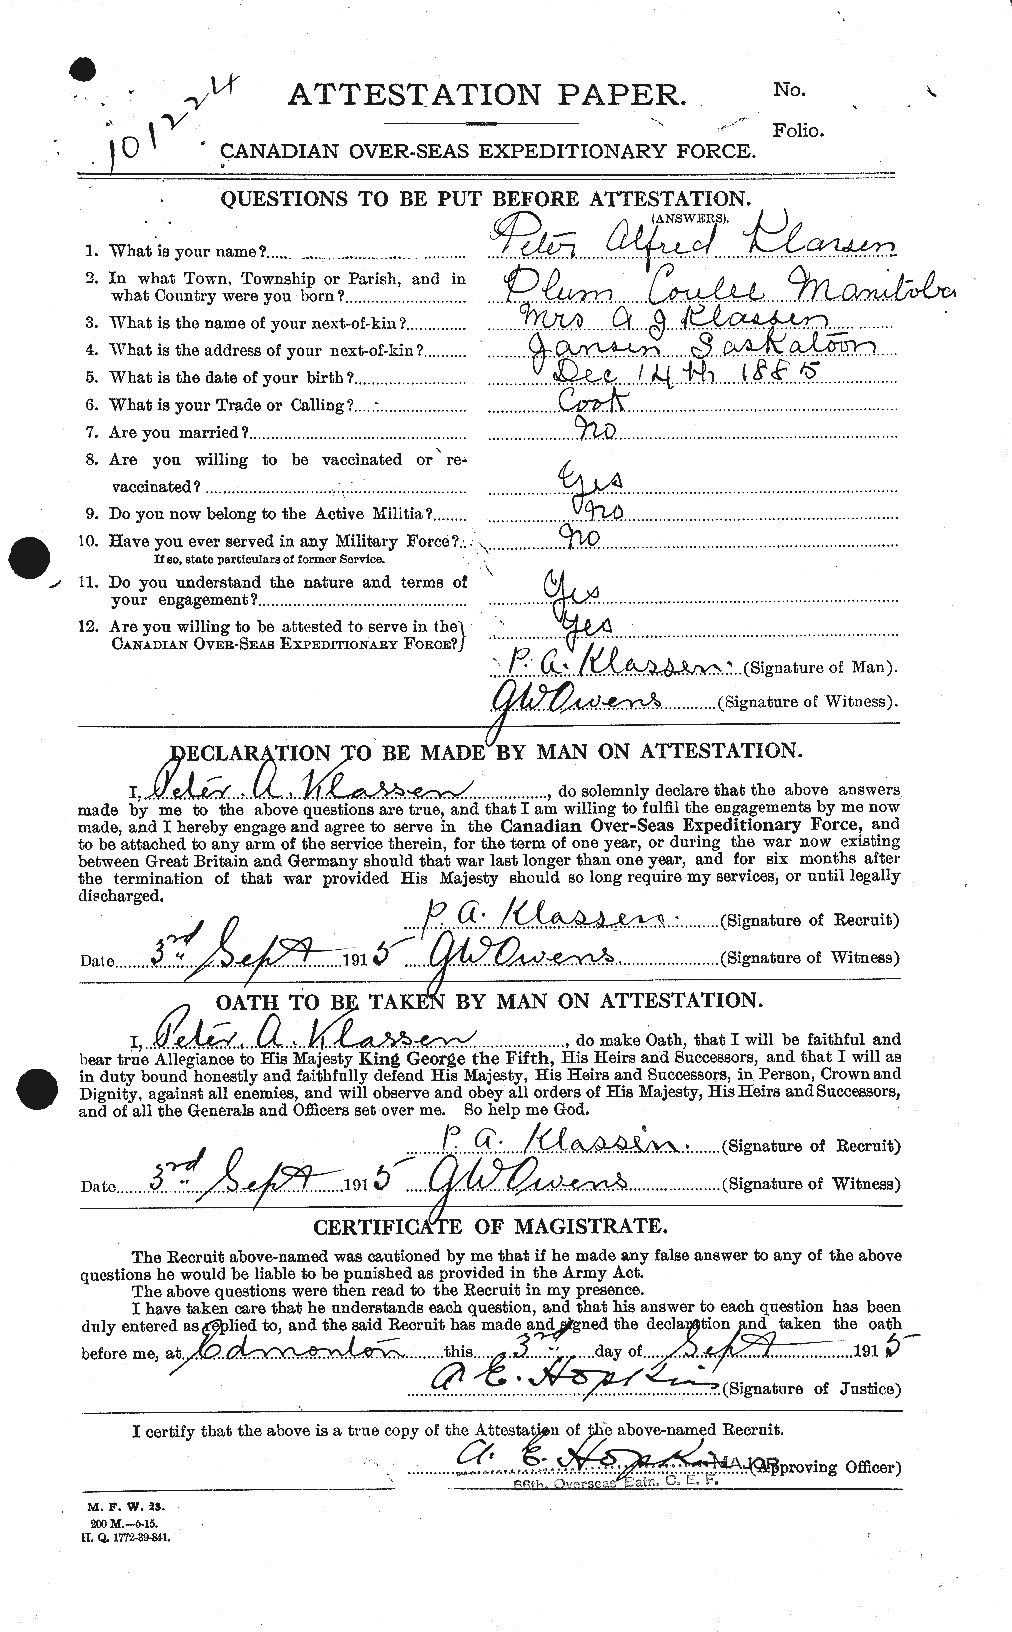 Personnel Records of the First World War - CEF 438737a